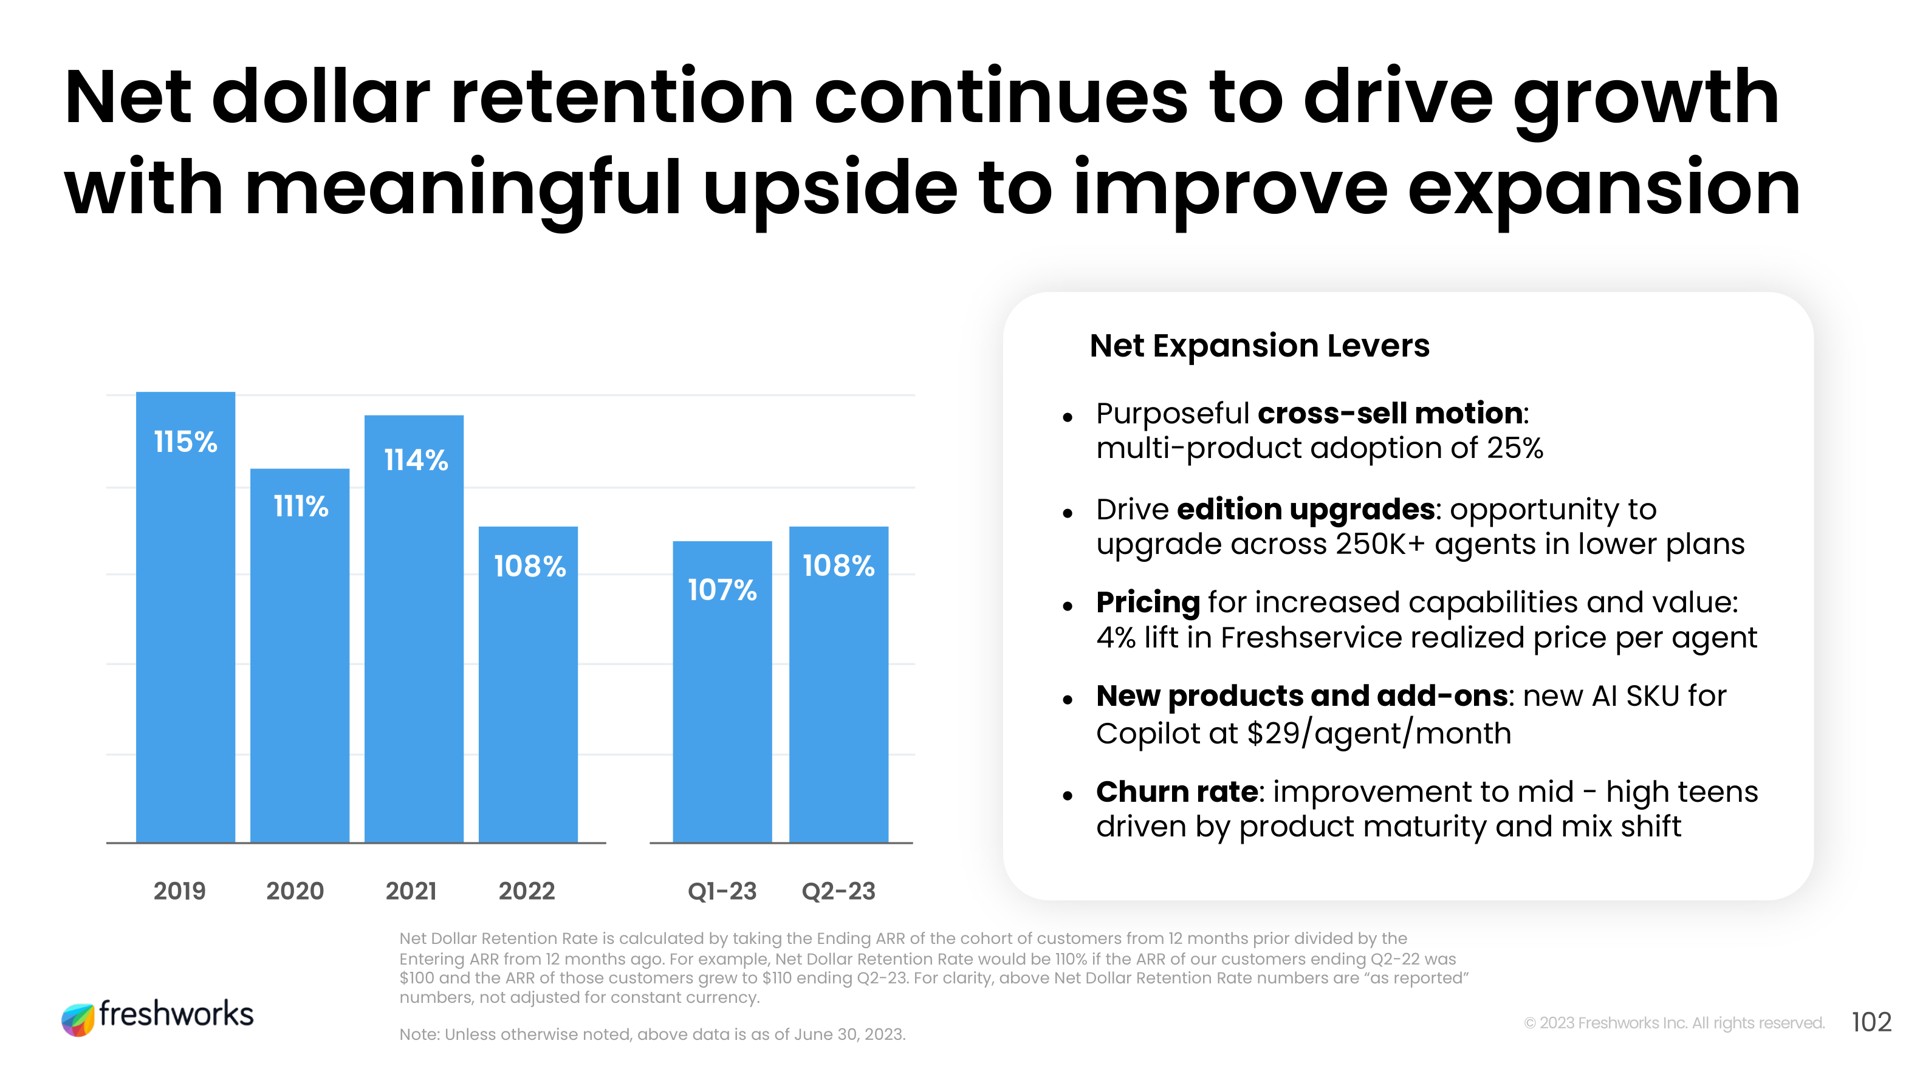 net dollar retention continues to drive growth with meaningful upside to improve expansion | Freshworks